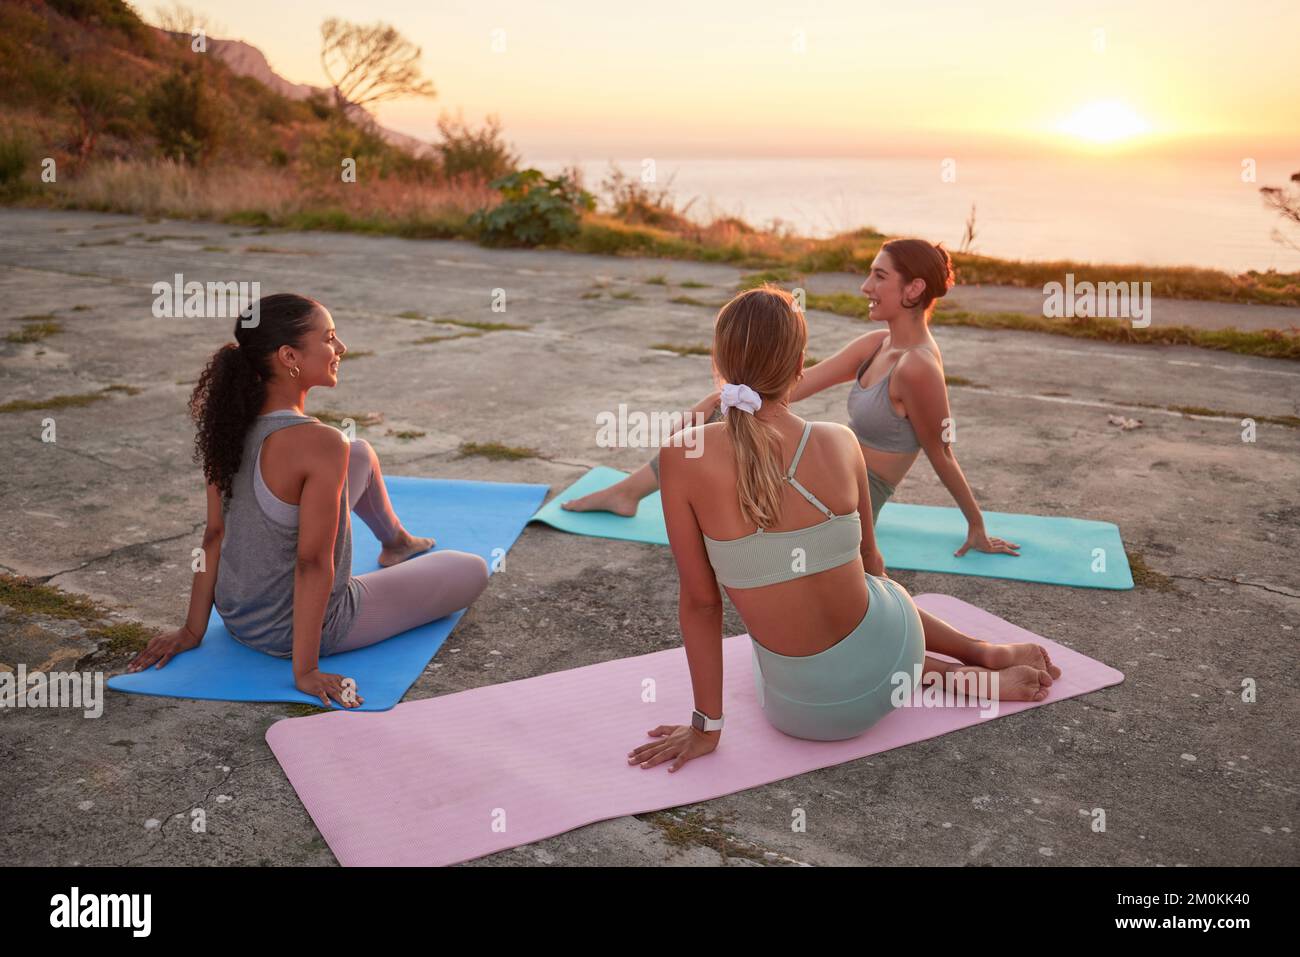 Full length of yoga women bonding, sitting together on mats after outdoor practice in remote nature. Diverse group of young active smiling friends at Stock Photo